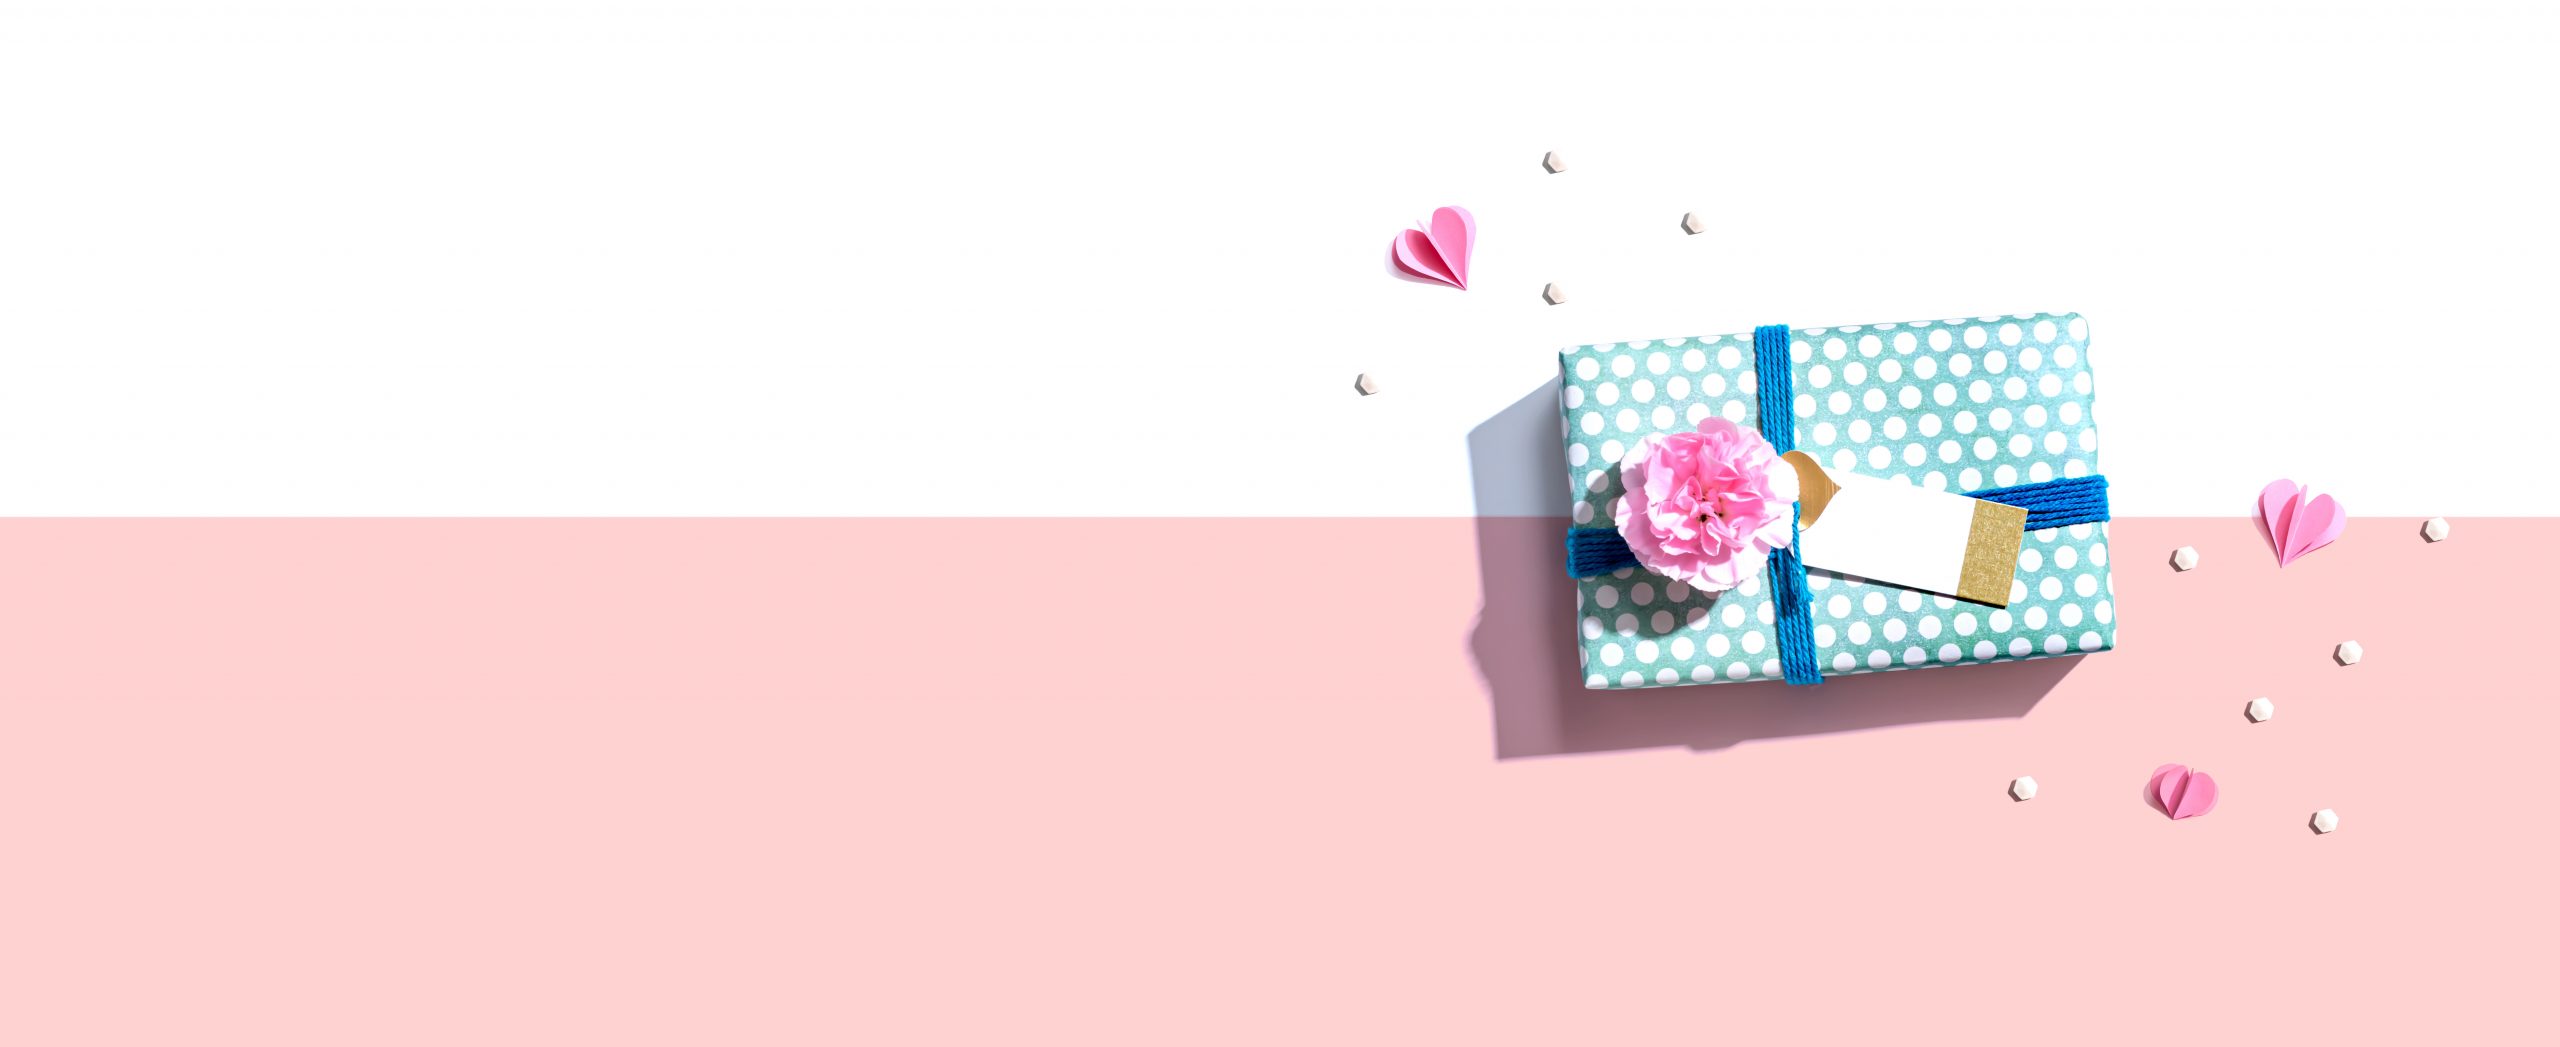 Appreciation,Theme,With,A,Gift,Box,And,A,Pink,Carnation